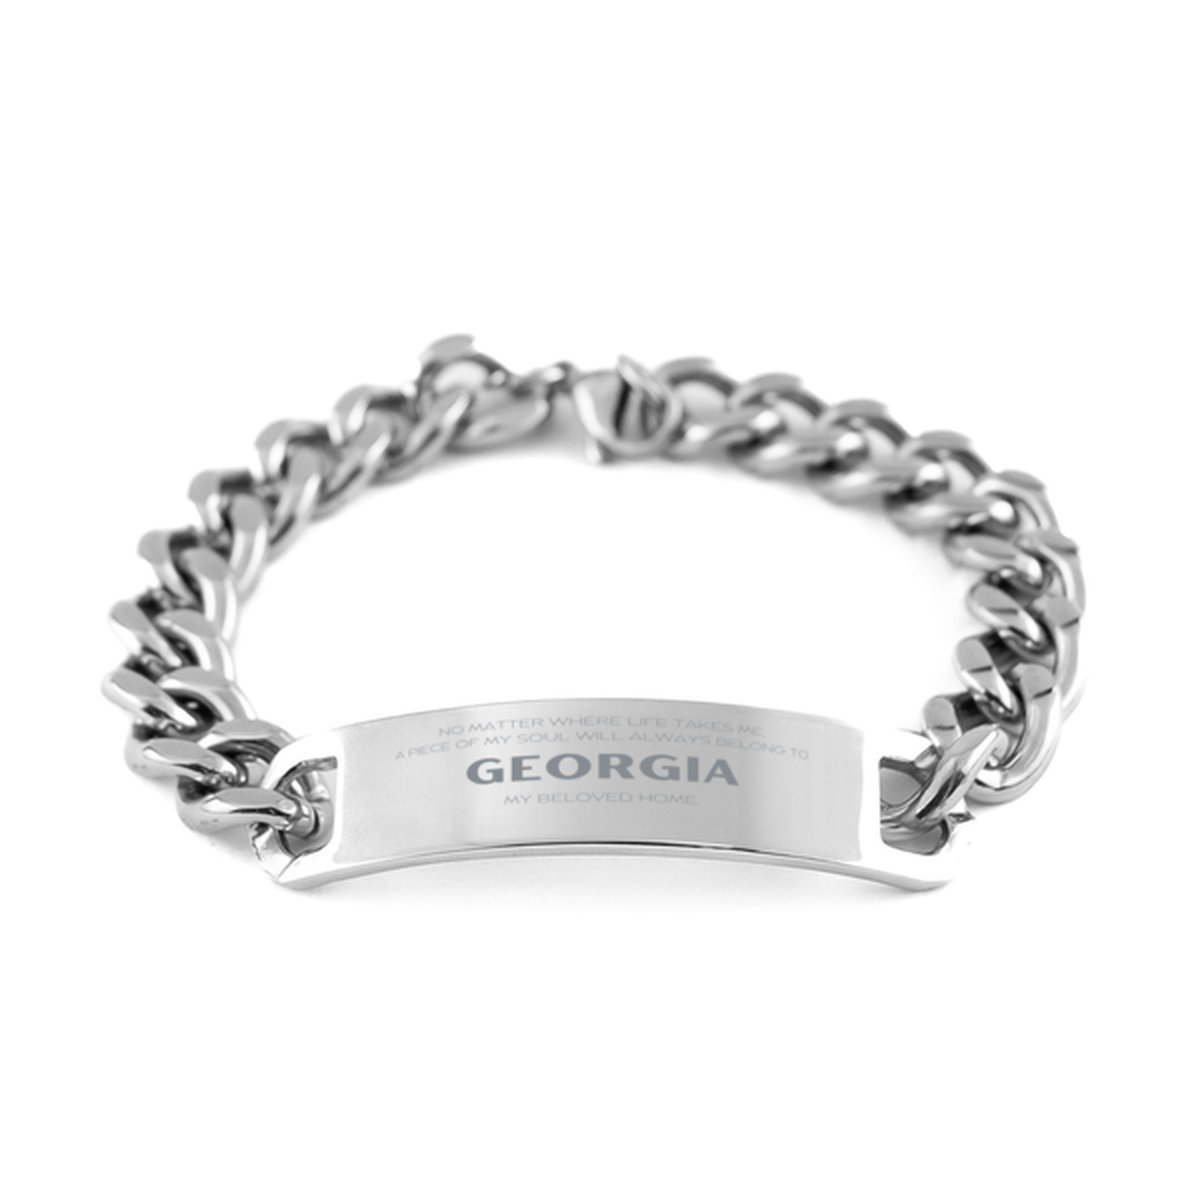 Love Georgia State Gifts, My soul will always belong to Georgia, Proud Cuban Chain Stainless Steel Bracelet, Birthday Unique Gifts For Georgia Men, Women, Friends